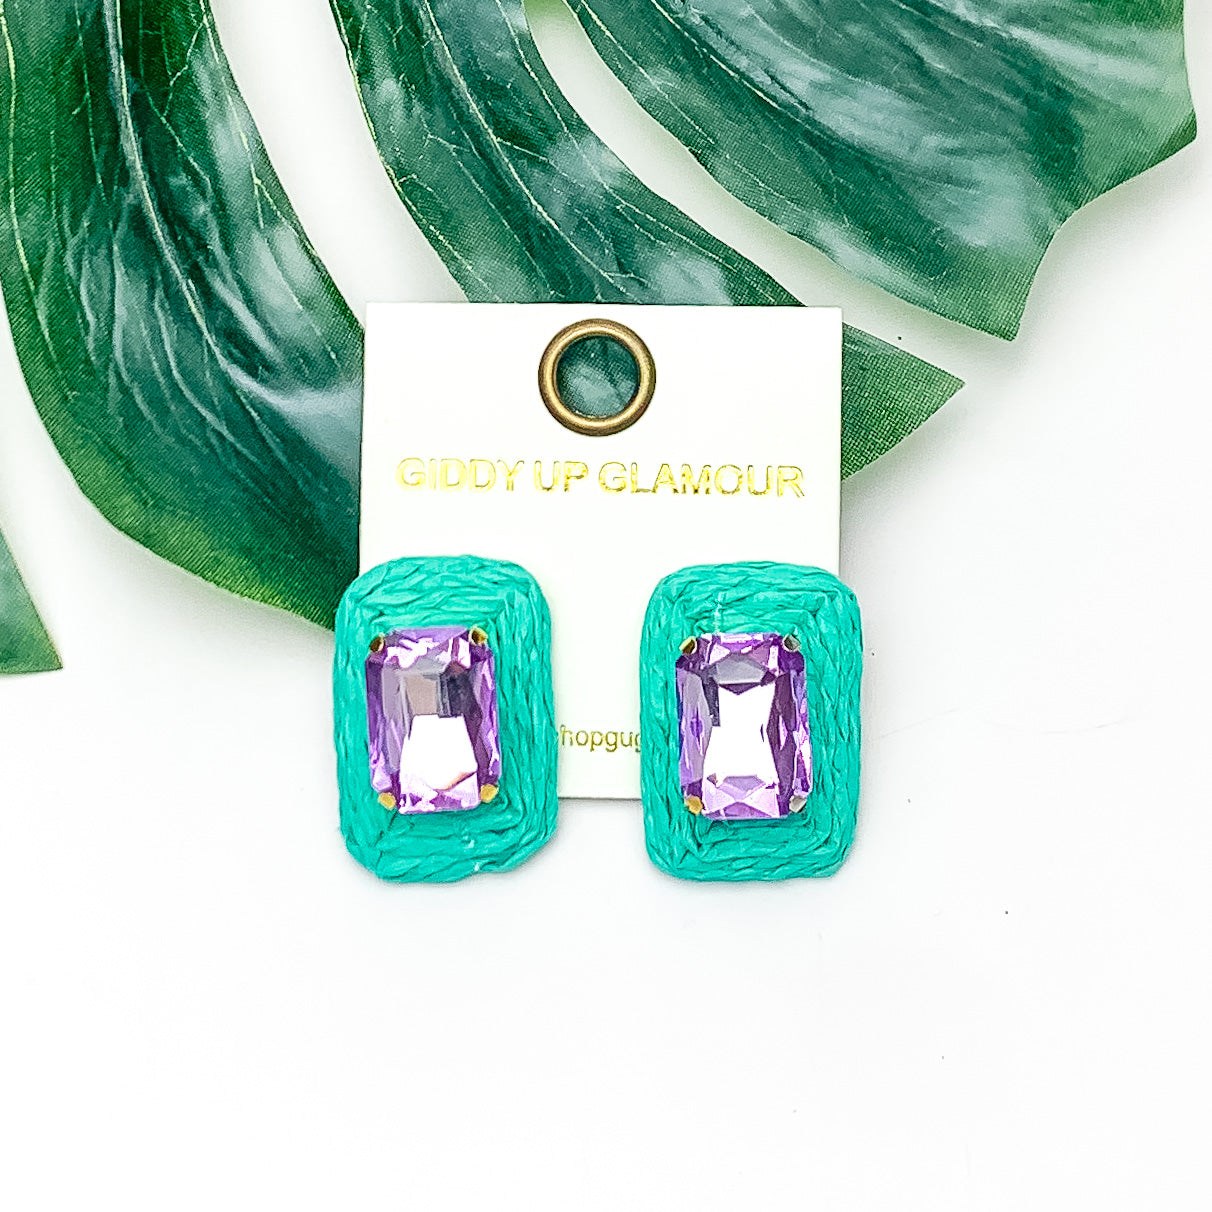 Truly Tropical Raffia Rectangle Earrings in turquoise green With Purple Crystal. Pictured on a white background with the earrings laying on a large leaf.